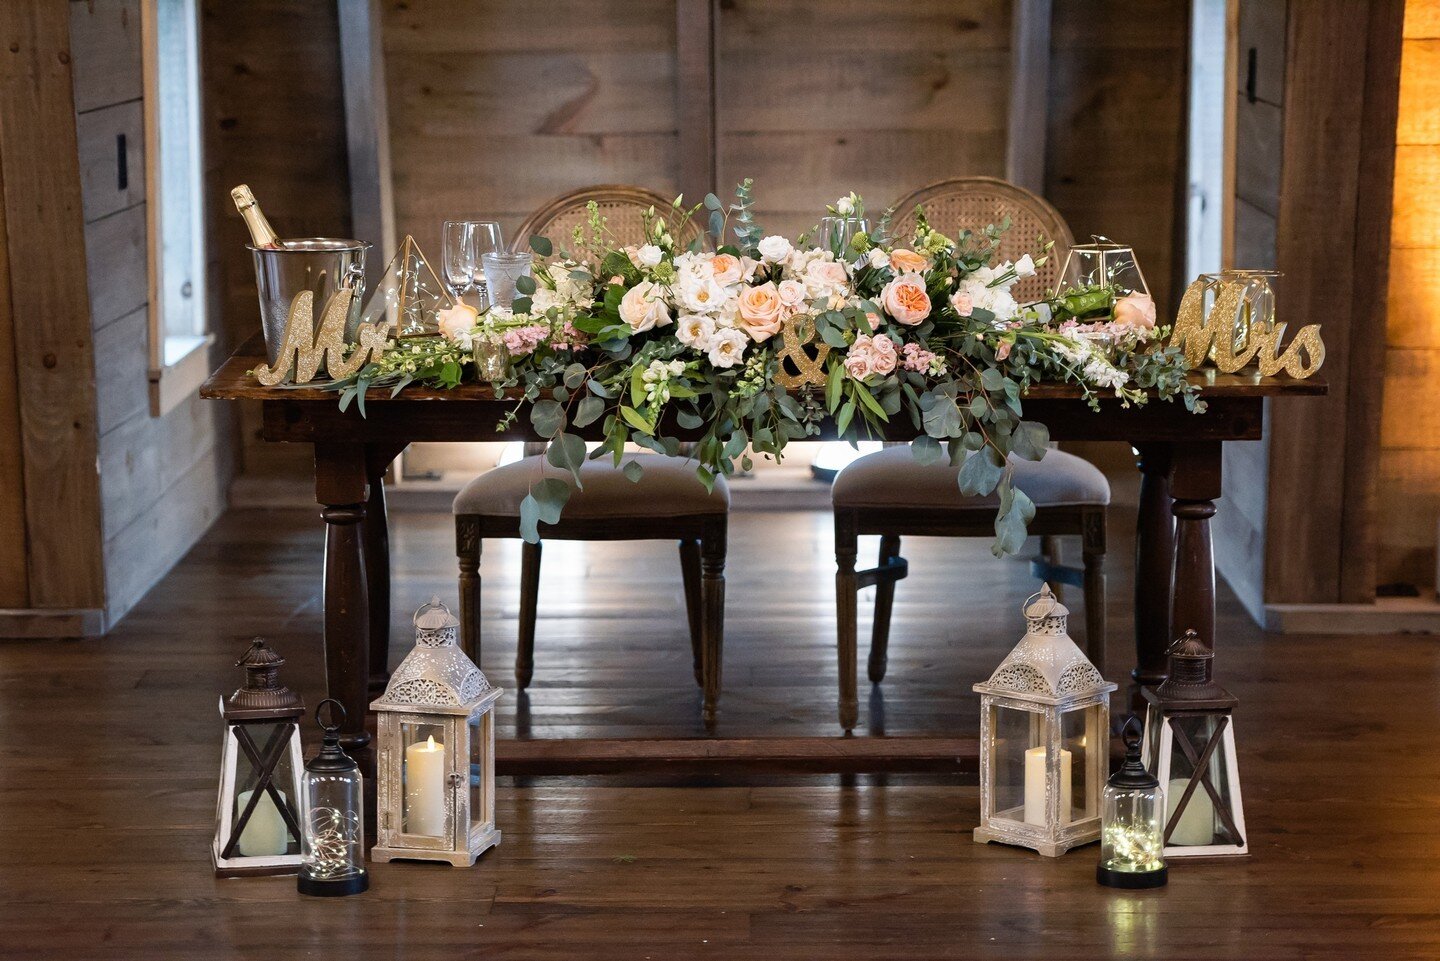 Don&rsquo;t forget to dress up your table! Adding some cute touches to where you&rsquo;ll be sitting looks great in photos- no, not photos of while you&rsquo;re eating (your photographers would never do that to you!), but photos during toasts and spe